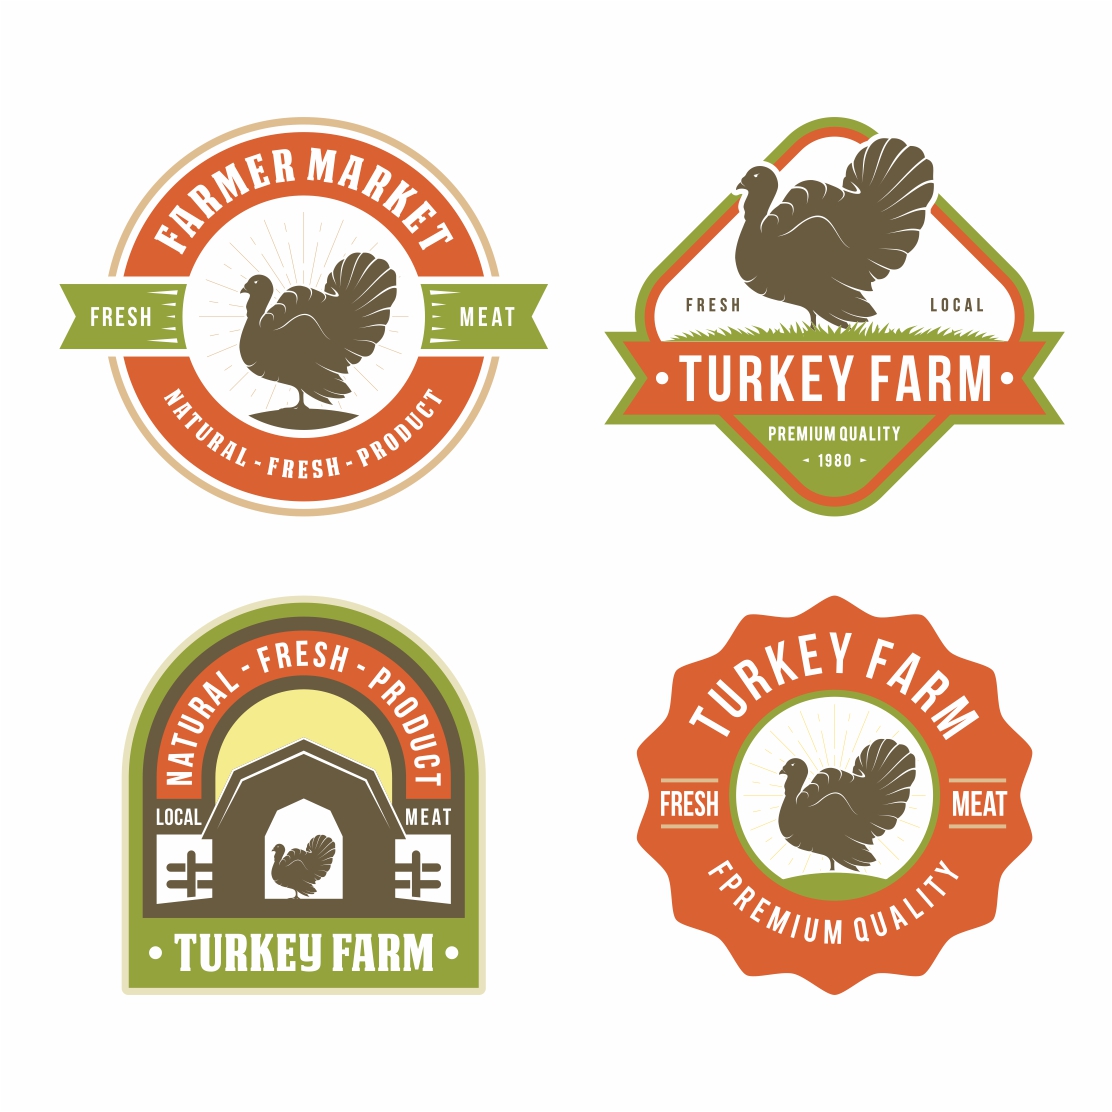 Turkey Farm logo design collection - only 10$ preview image.